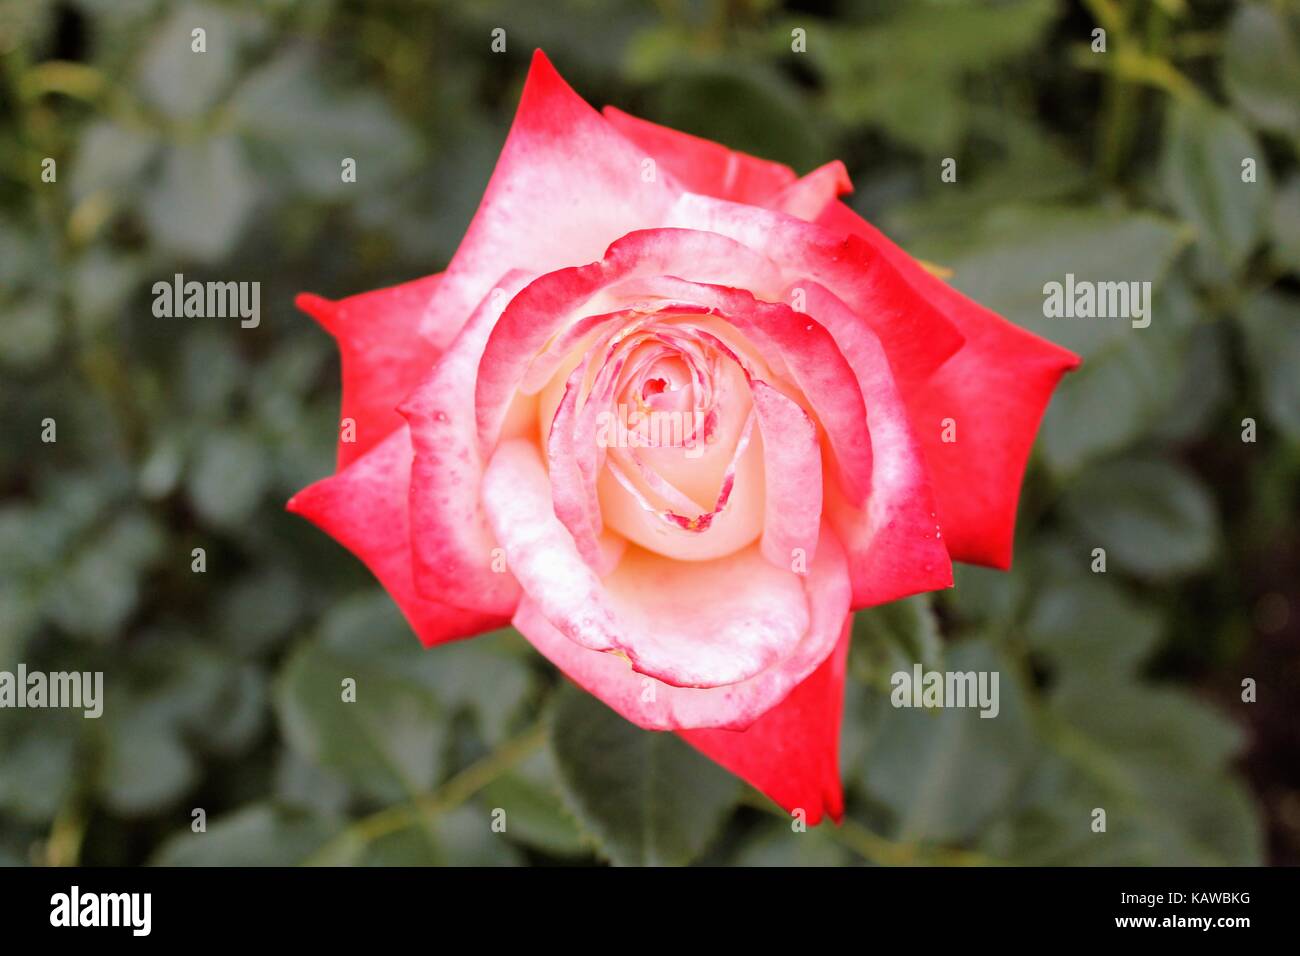 A beautiful red rose growing in the garden. Stock Photo